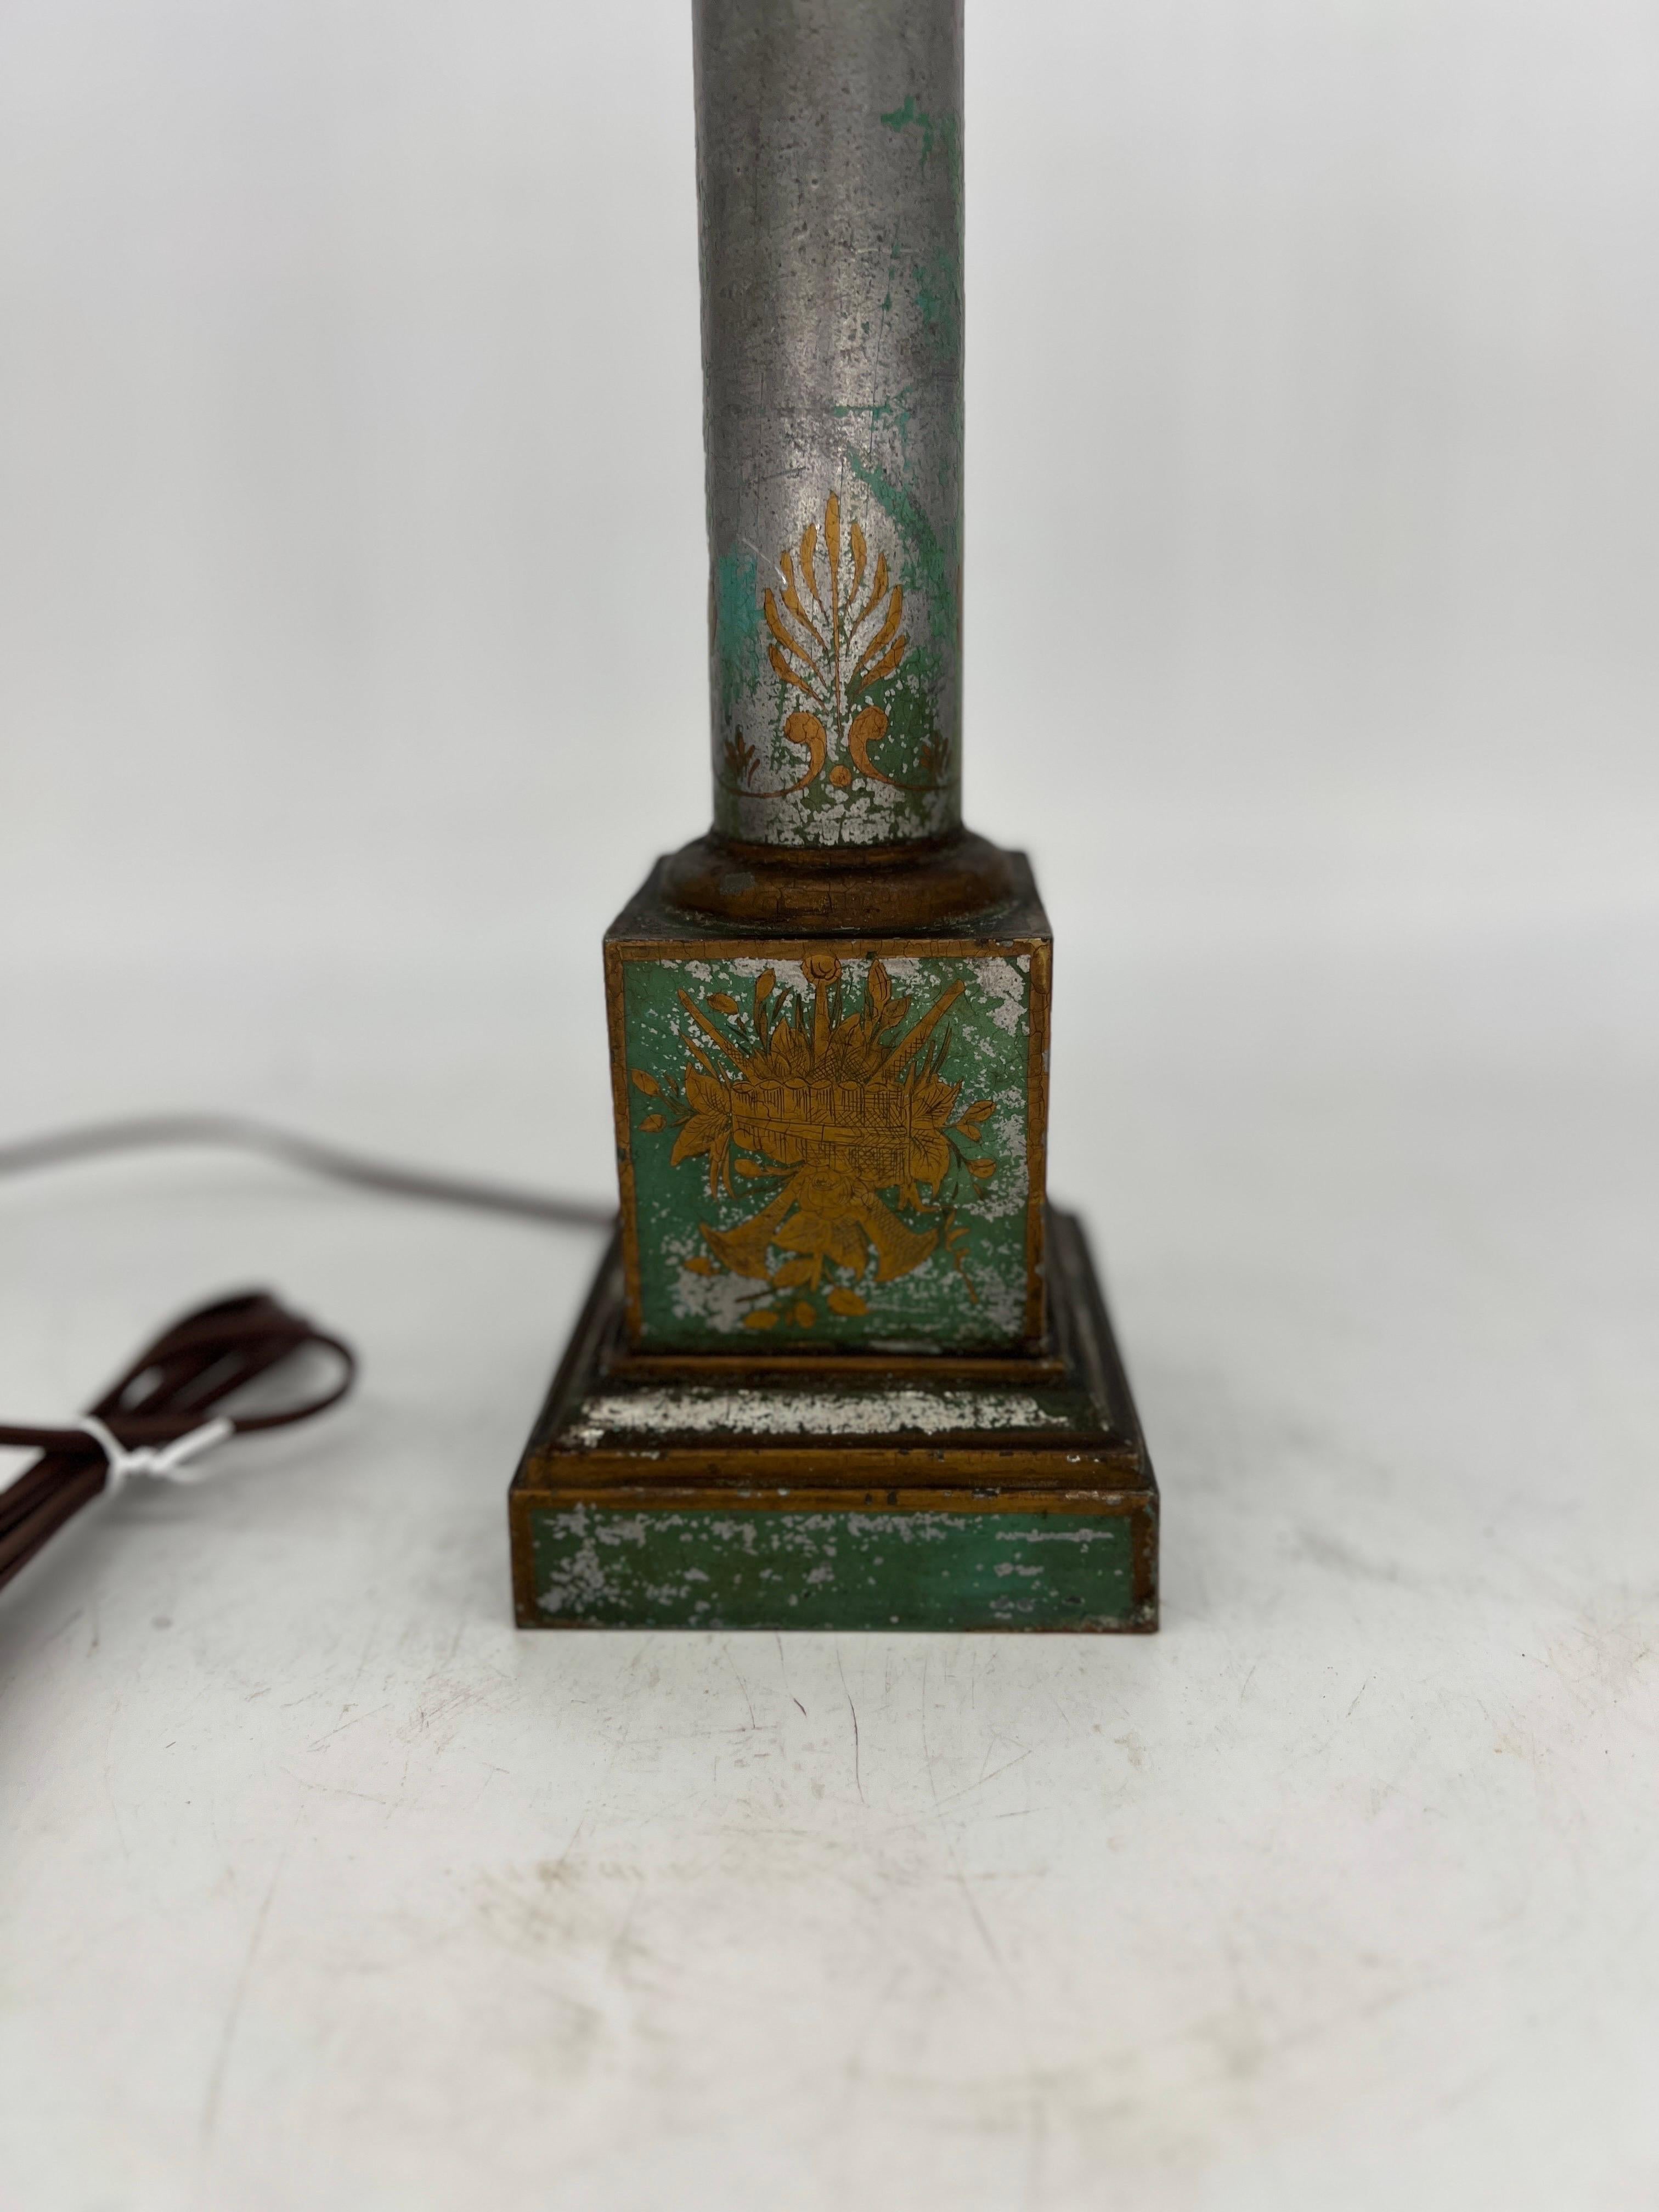 French, early 20th century. 

An antique neoclassical style table lamp. The lamp features a traditional column model form with a silver tole base which has original green paint to surface and accented by gilt lyre, botanical and other motifs.